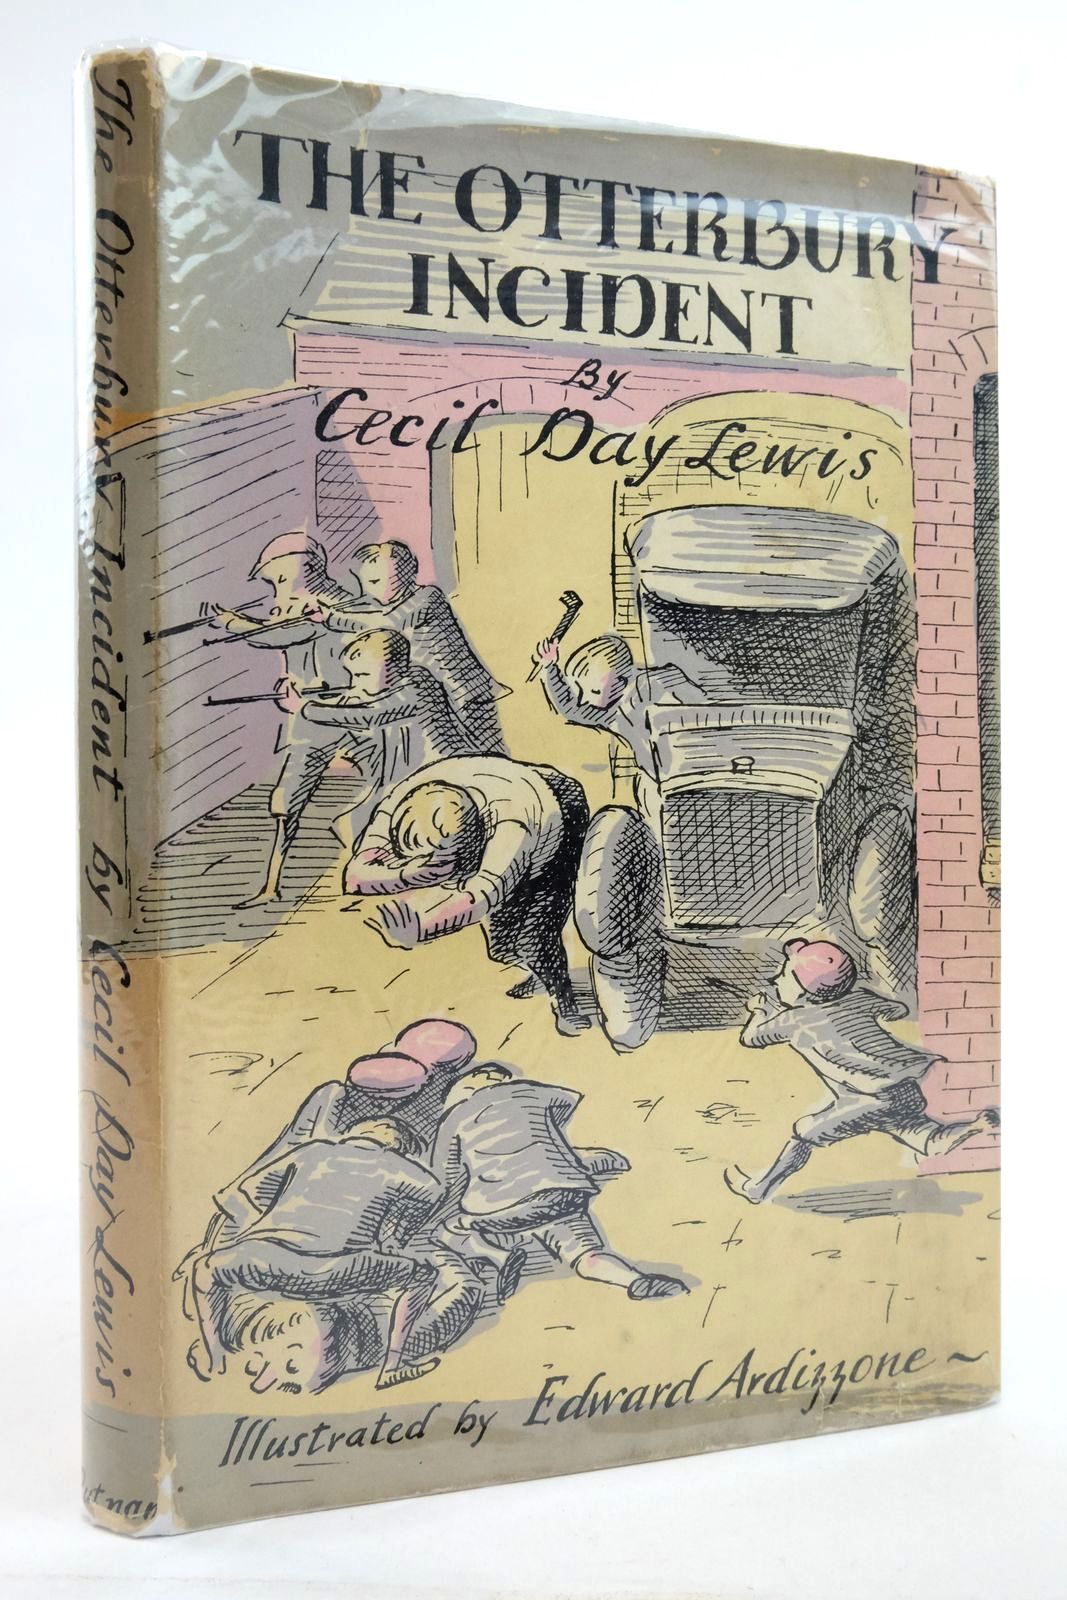 Photo of THE OTTERBURY INCIDENT written by Lewis, Cecil Day illustrated by Ardizzone, Edward published by Putnam &amp; Co. Ltd. (STOCK CODE: 2136921)  for sale by Stella & Rose's Books